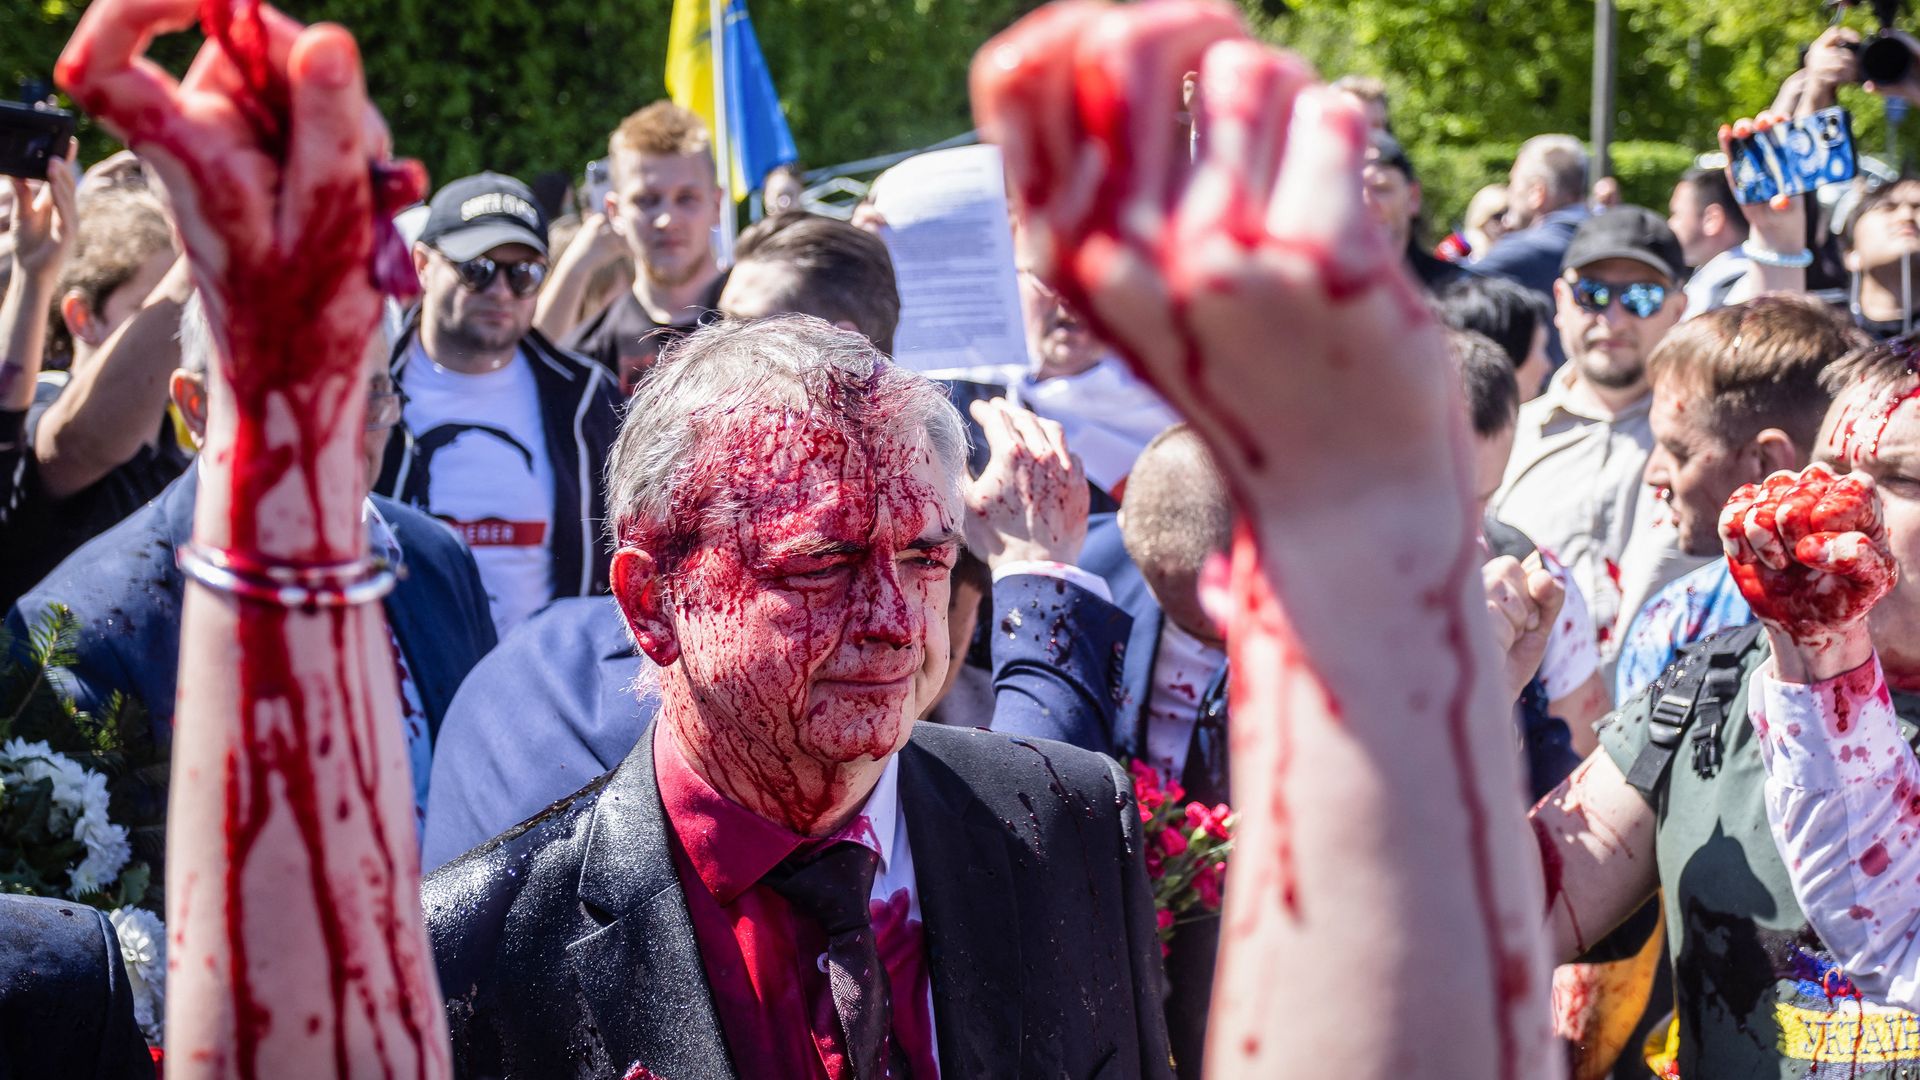 Russian Ambassador to Poland, Ambassador Sergey Andreev reacts after being covered with red paint during a protest.